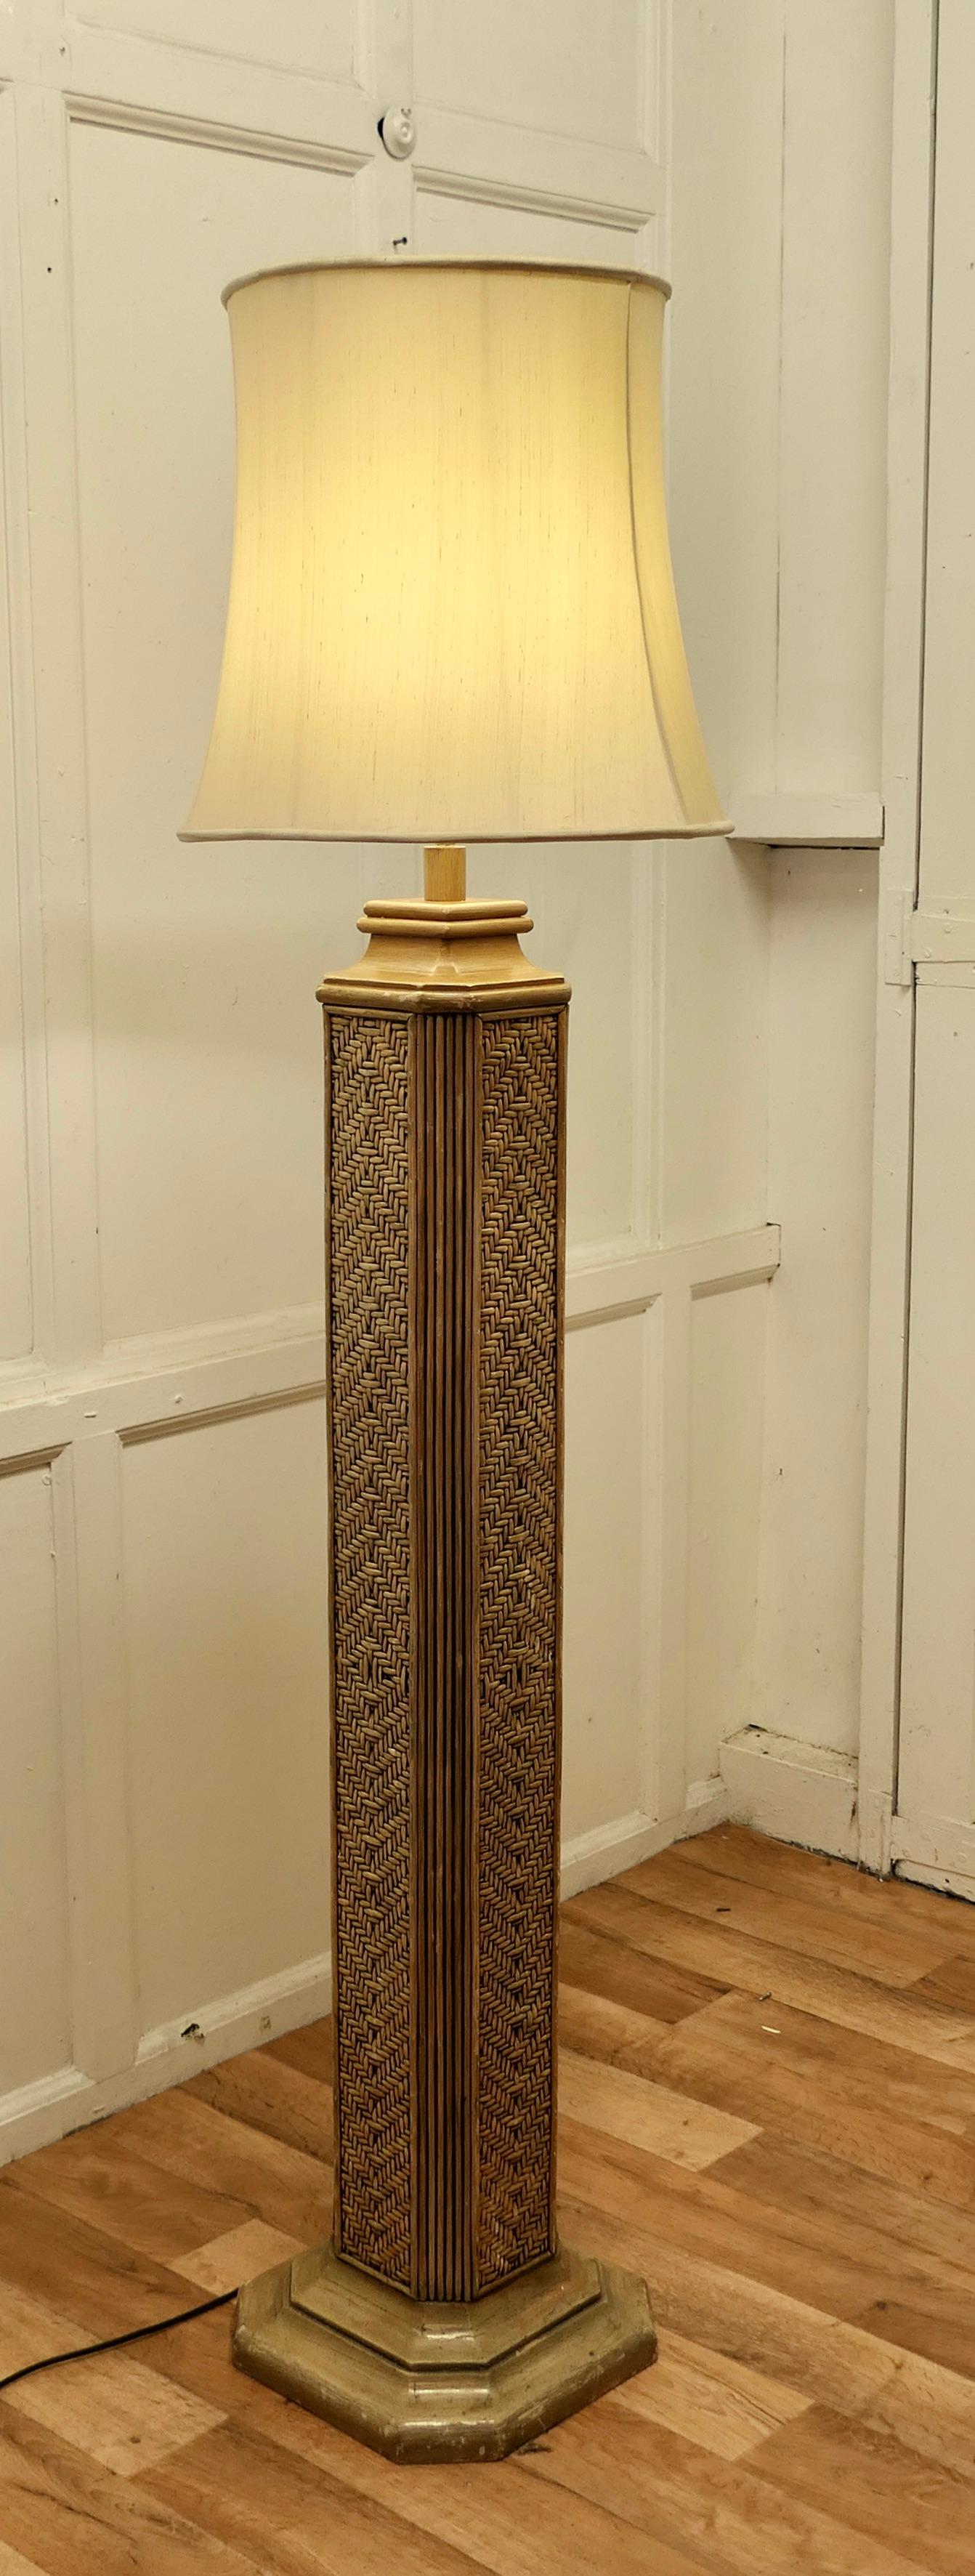 Tall Art Deco Bamboo Cane Column Floor Lamp In Good Condition For Sale In Chillerton, Isle of Wight